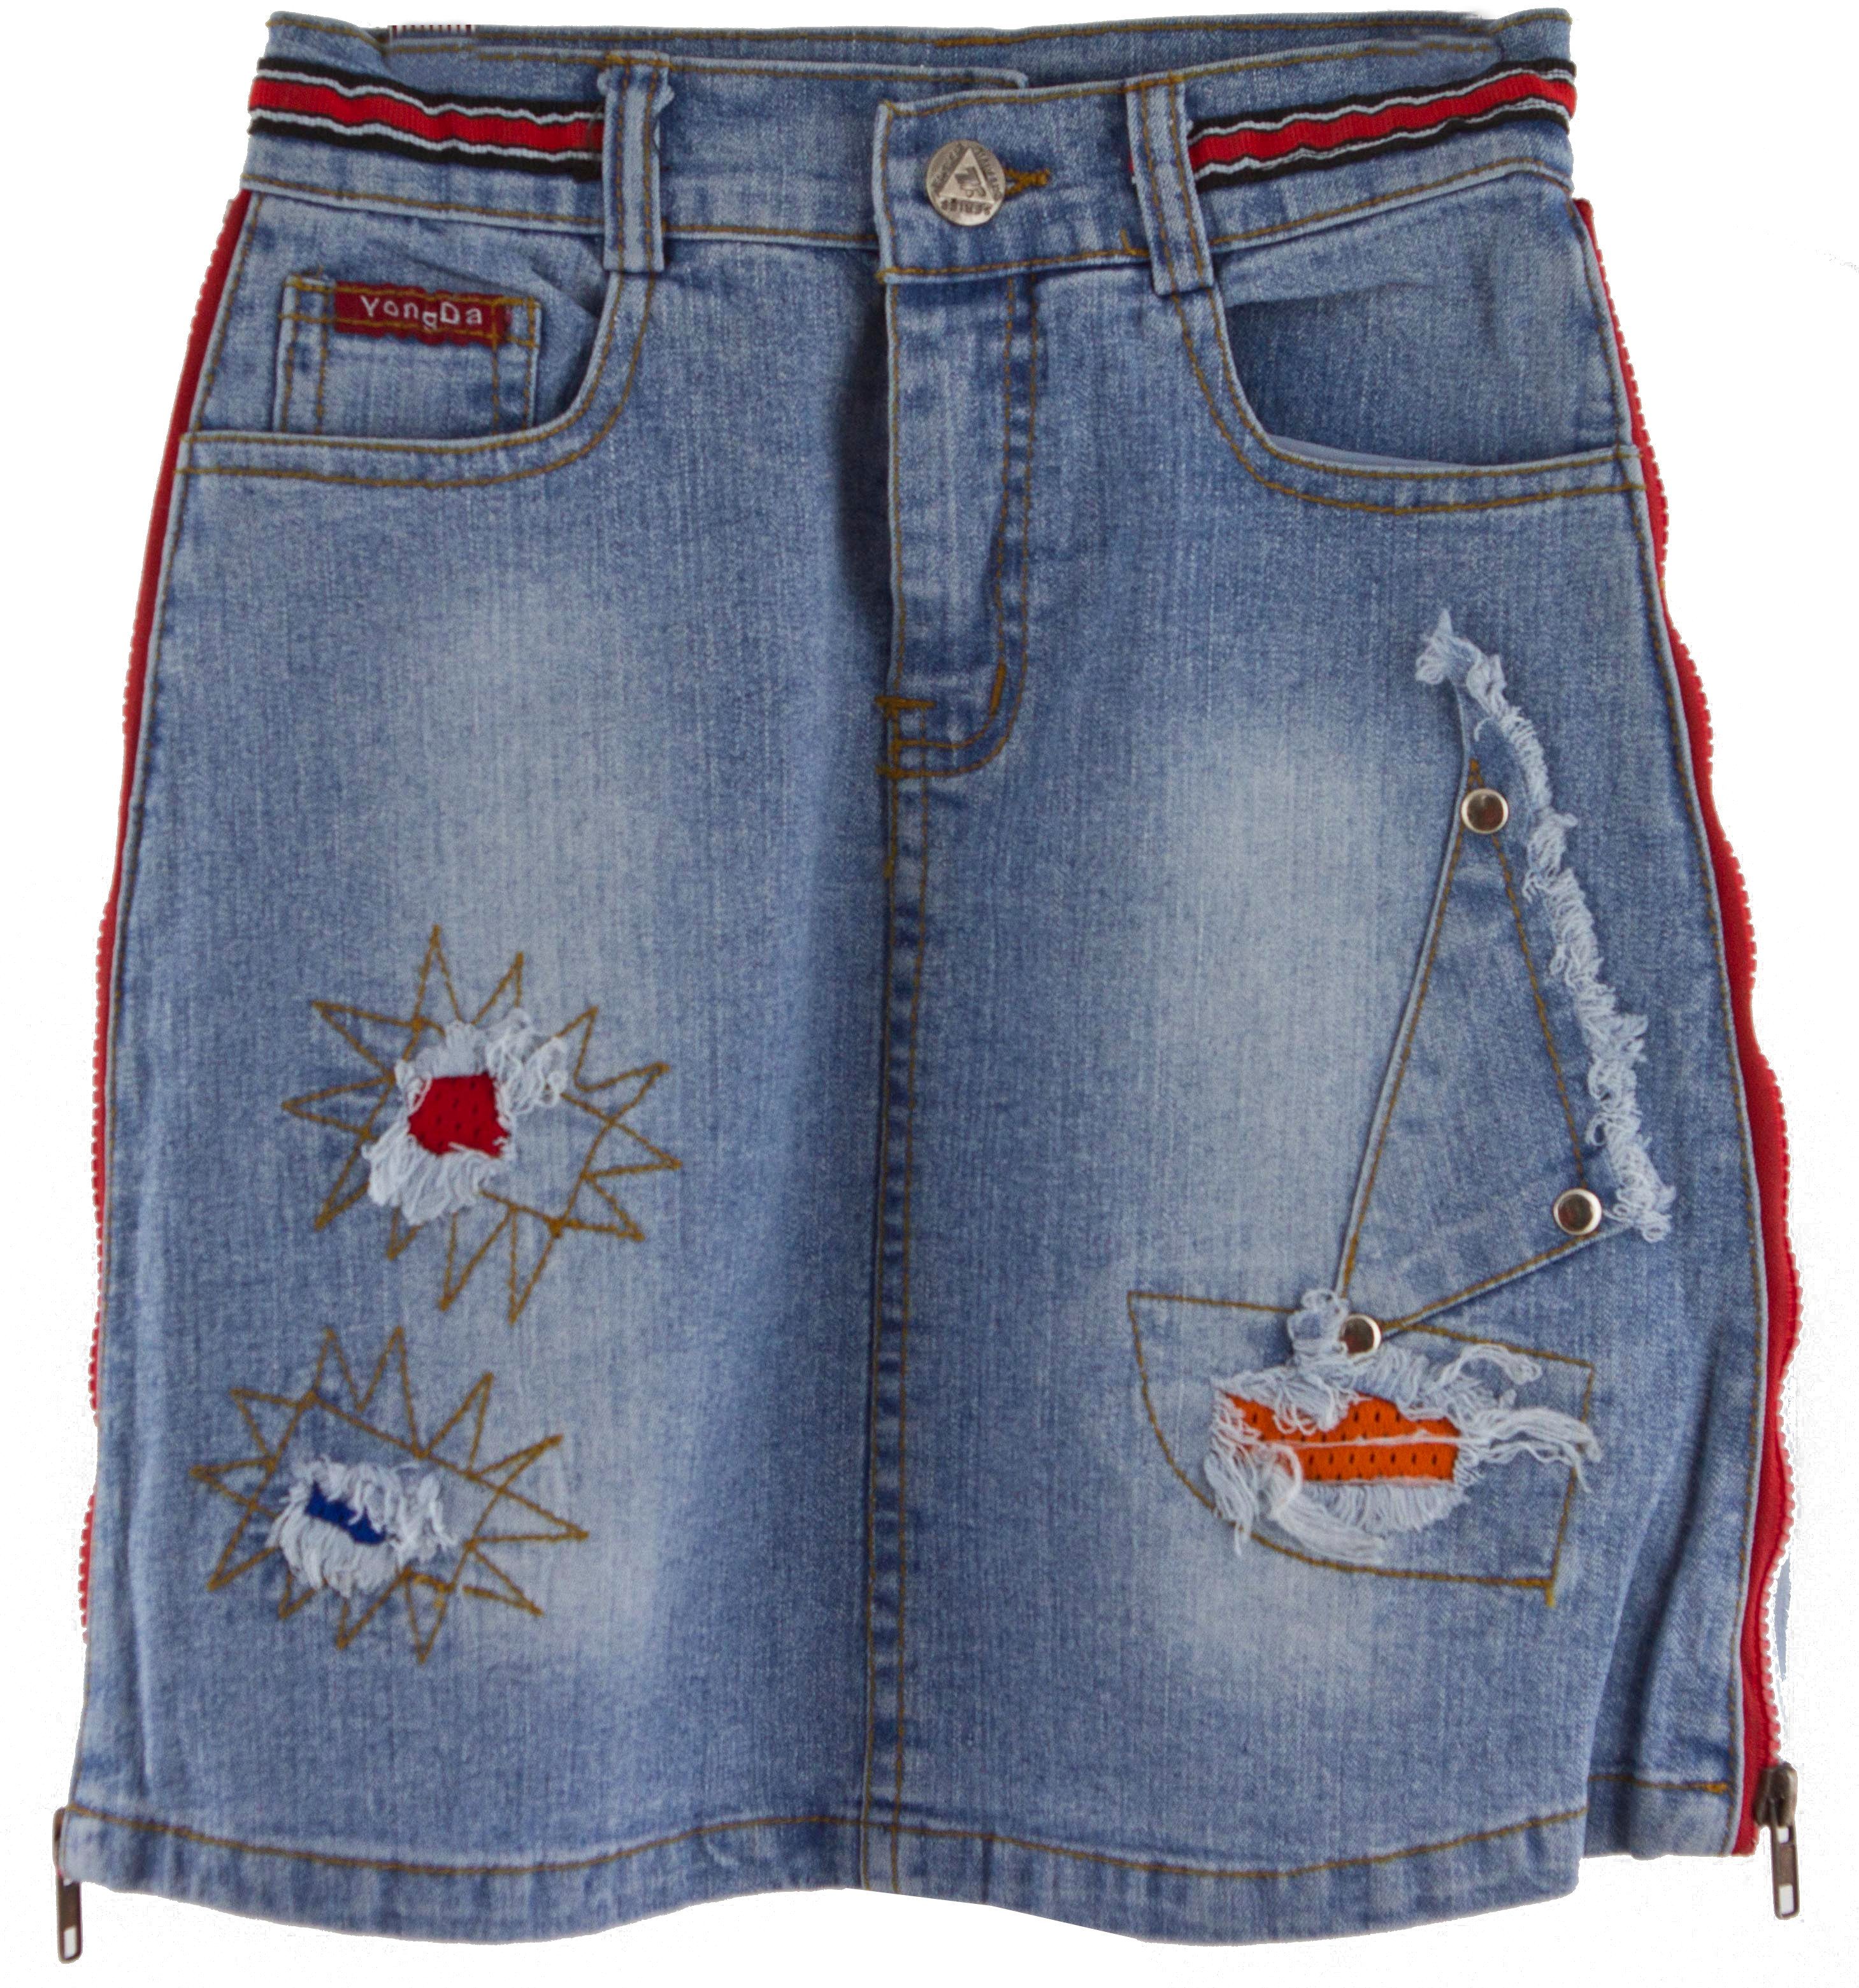 Jeansrock Patches Denim knielang Rock Schlaufen Mädchen und Mädchen Denim und Jeansrock-Kids-Reissverschluss Schlaufen Patches Style mit Jeansrock Kinder Rock Girl Kids Kids Rock Jeansrock Kinder mit knielang Style Rock AvaMia